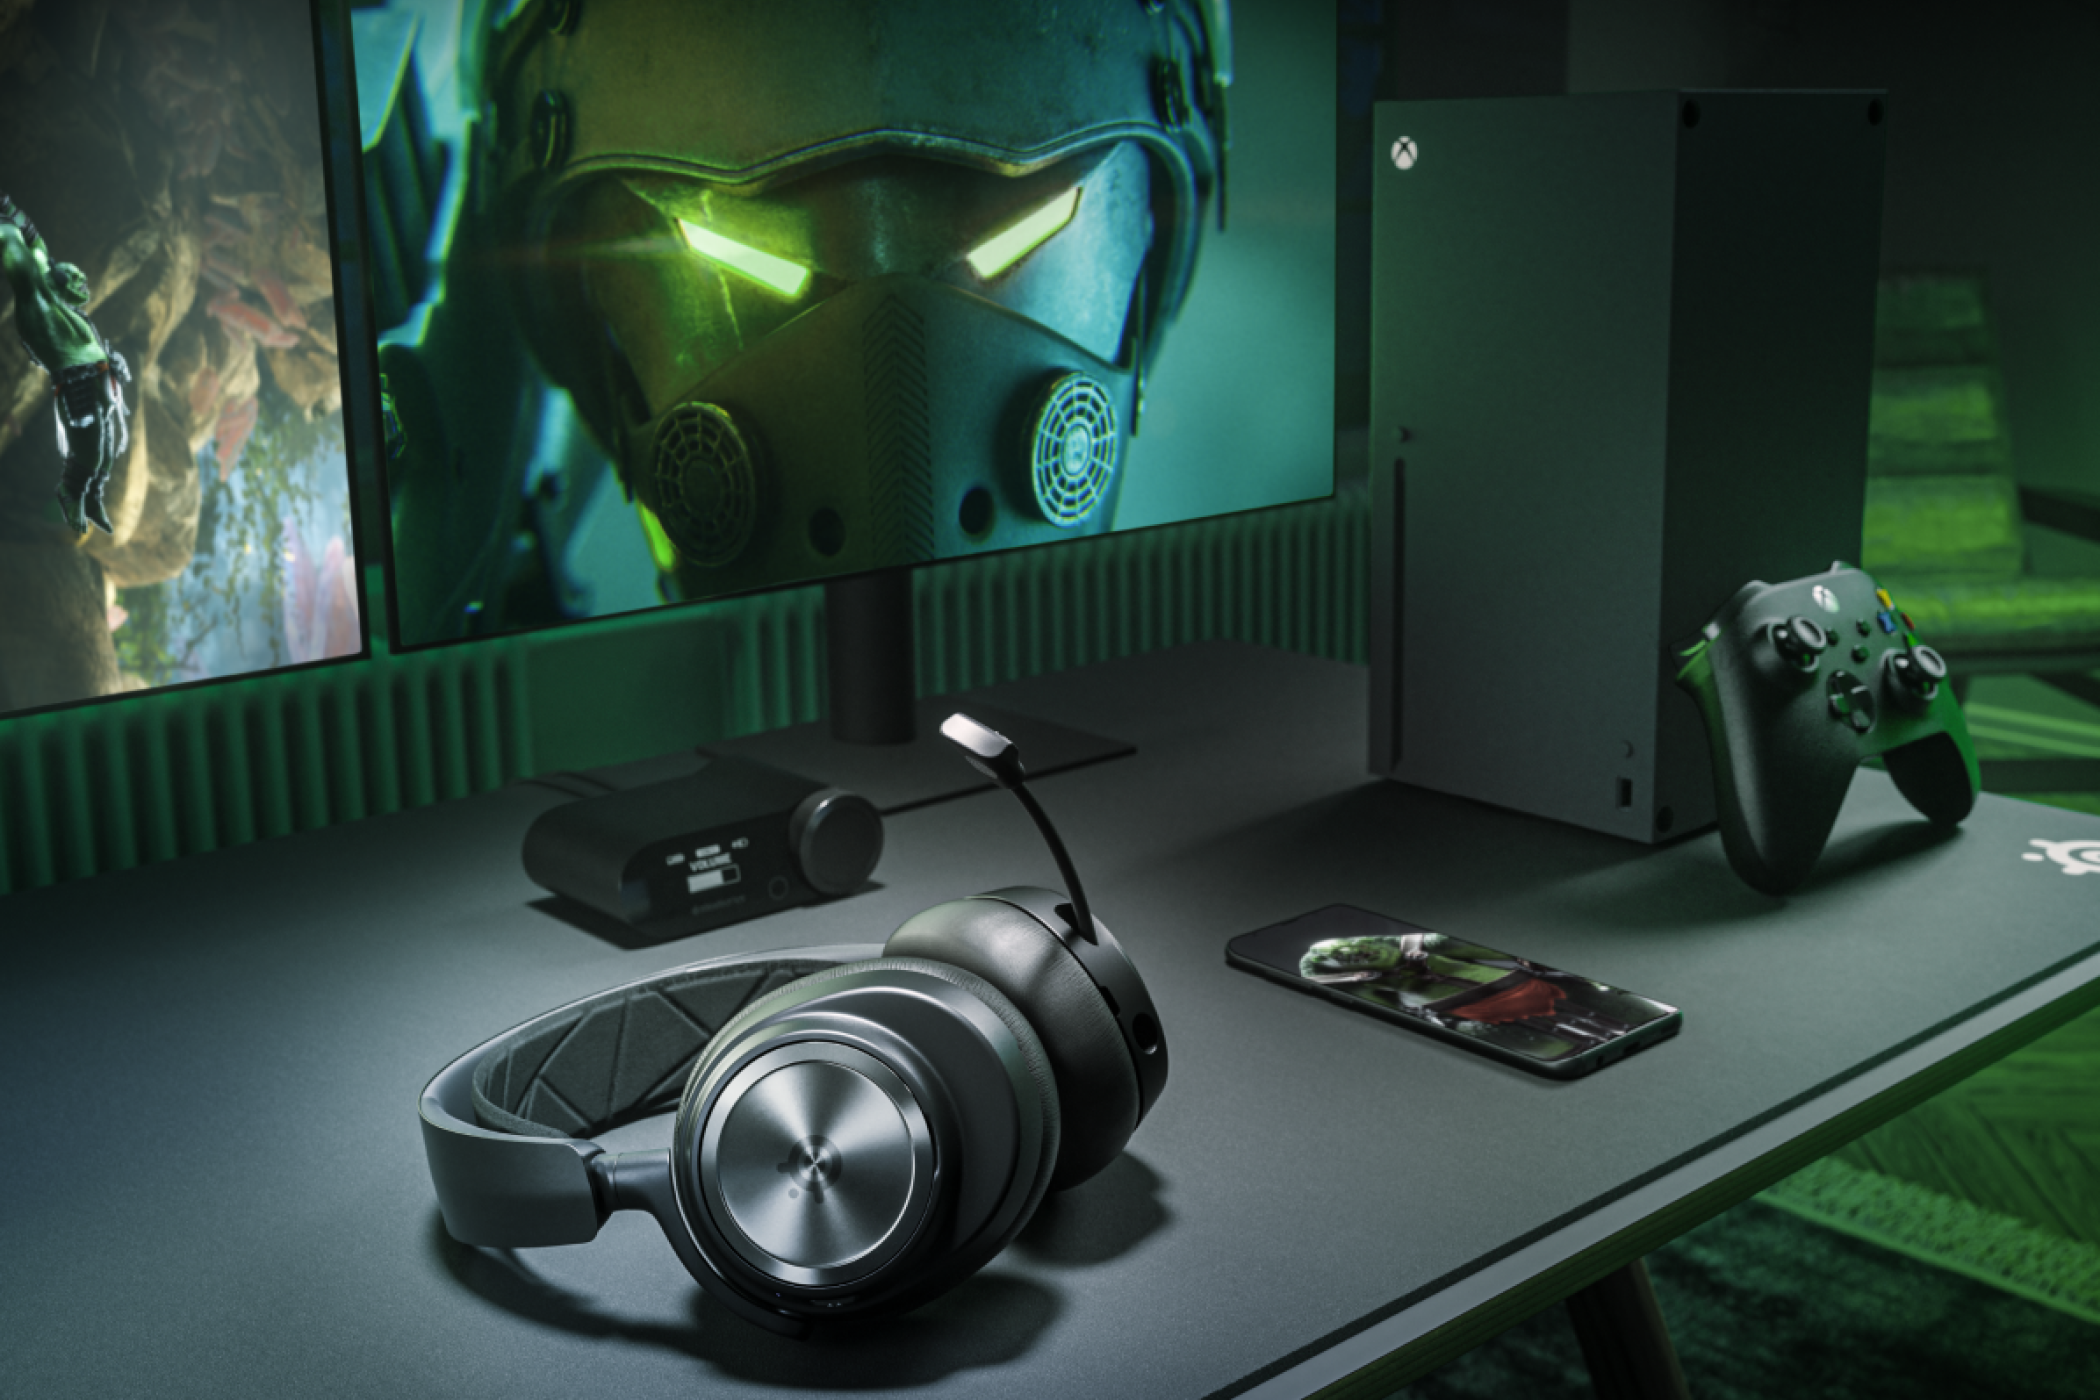 SteelSeries Arctis Nova Pro Wireless Xbox headset resting on a table next to an Xbox Series X console